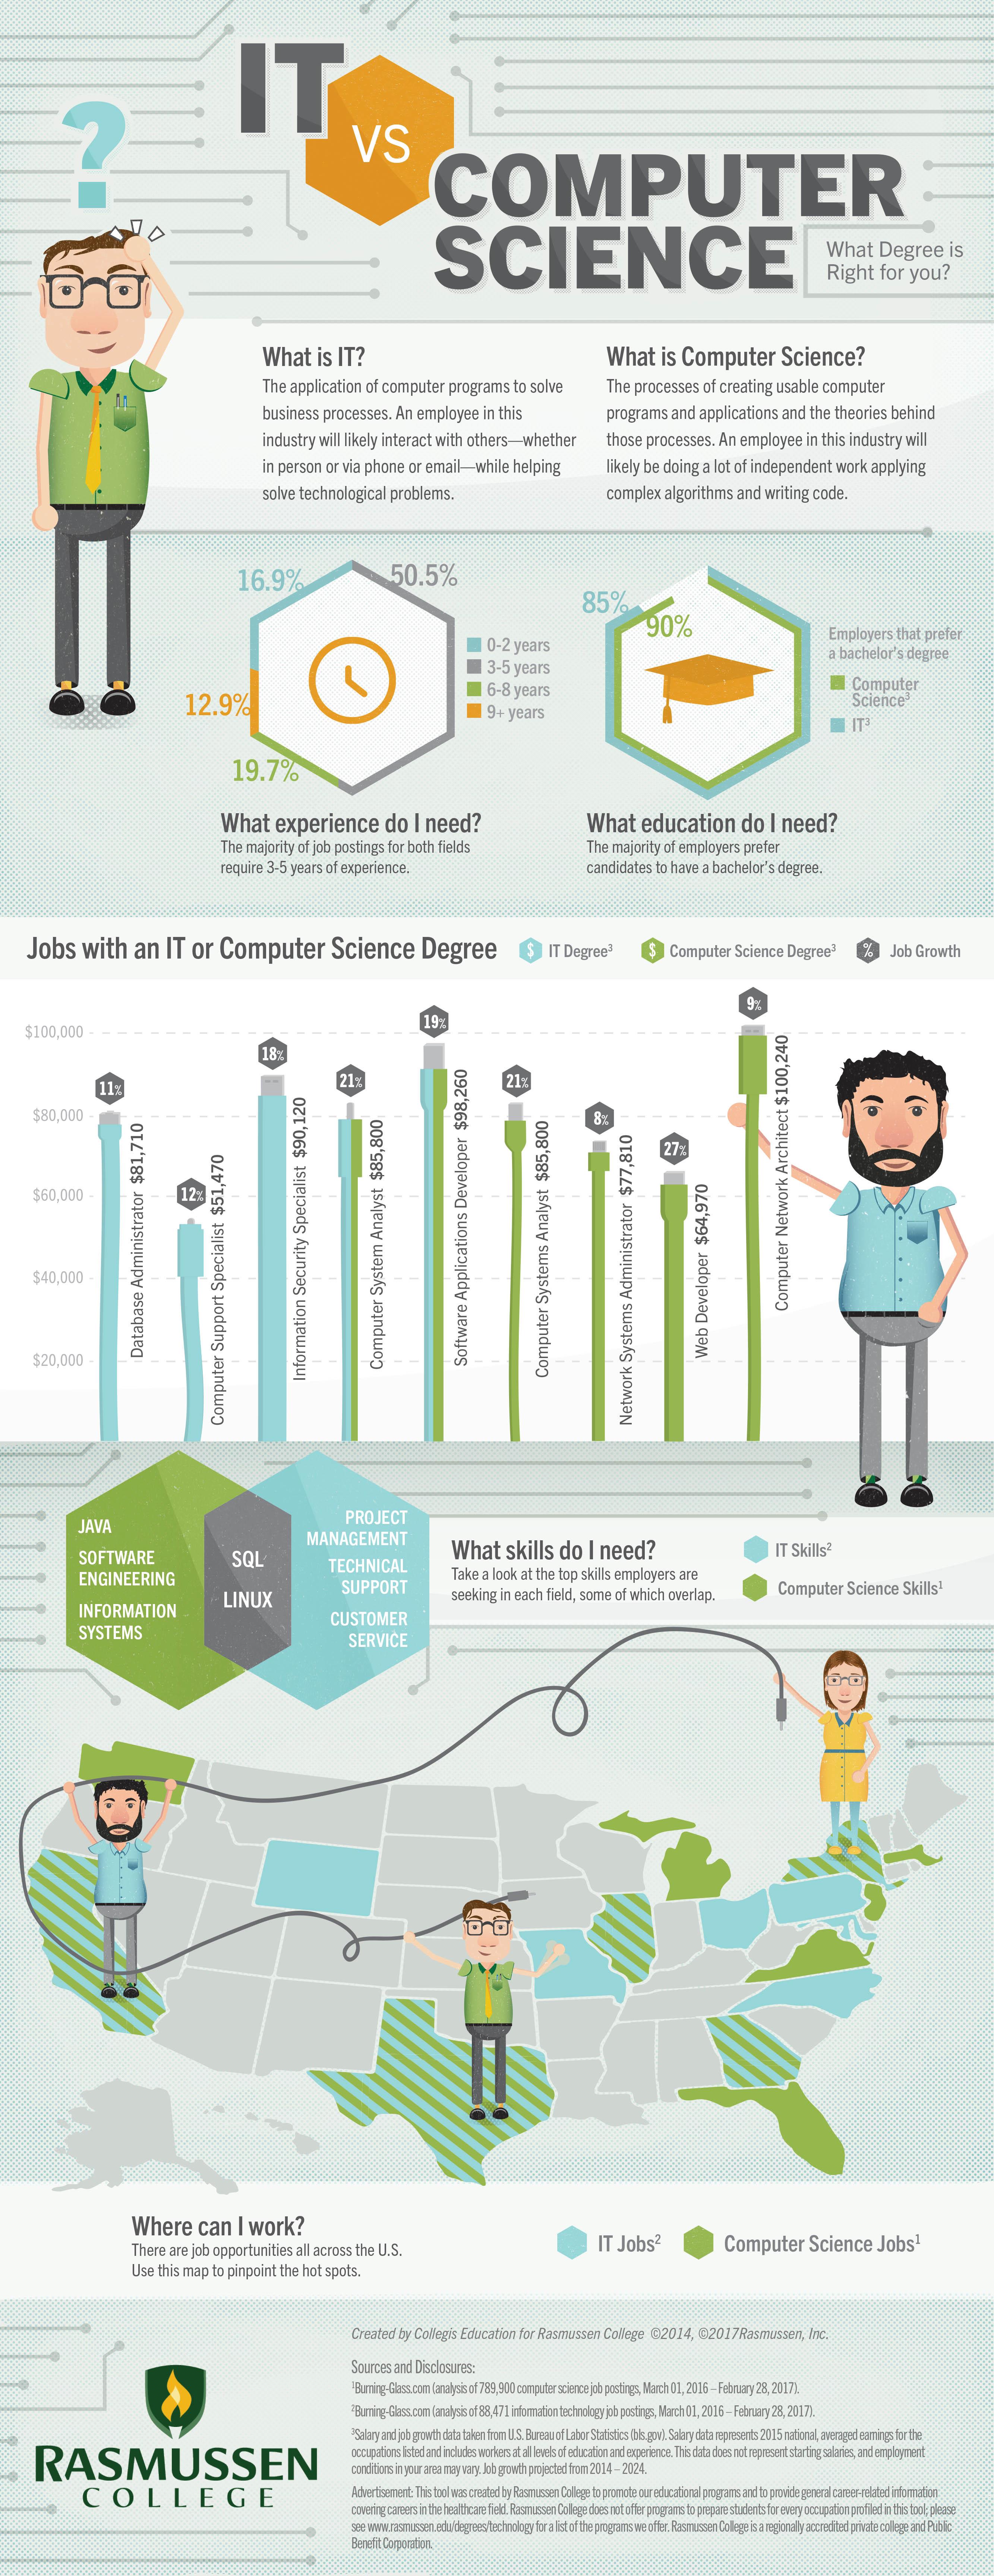 IT vs. Computer Science: Which Degree is Right for You? [Infographic]